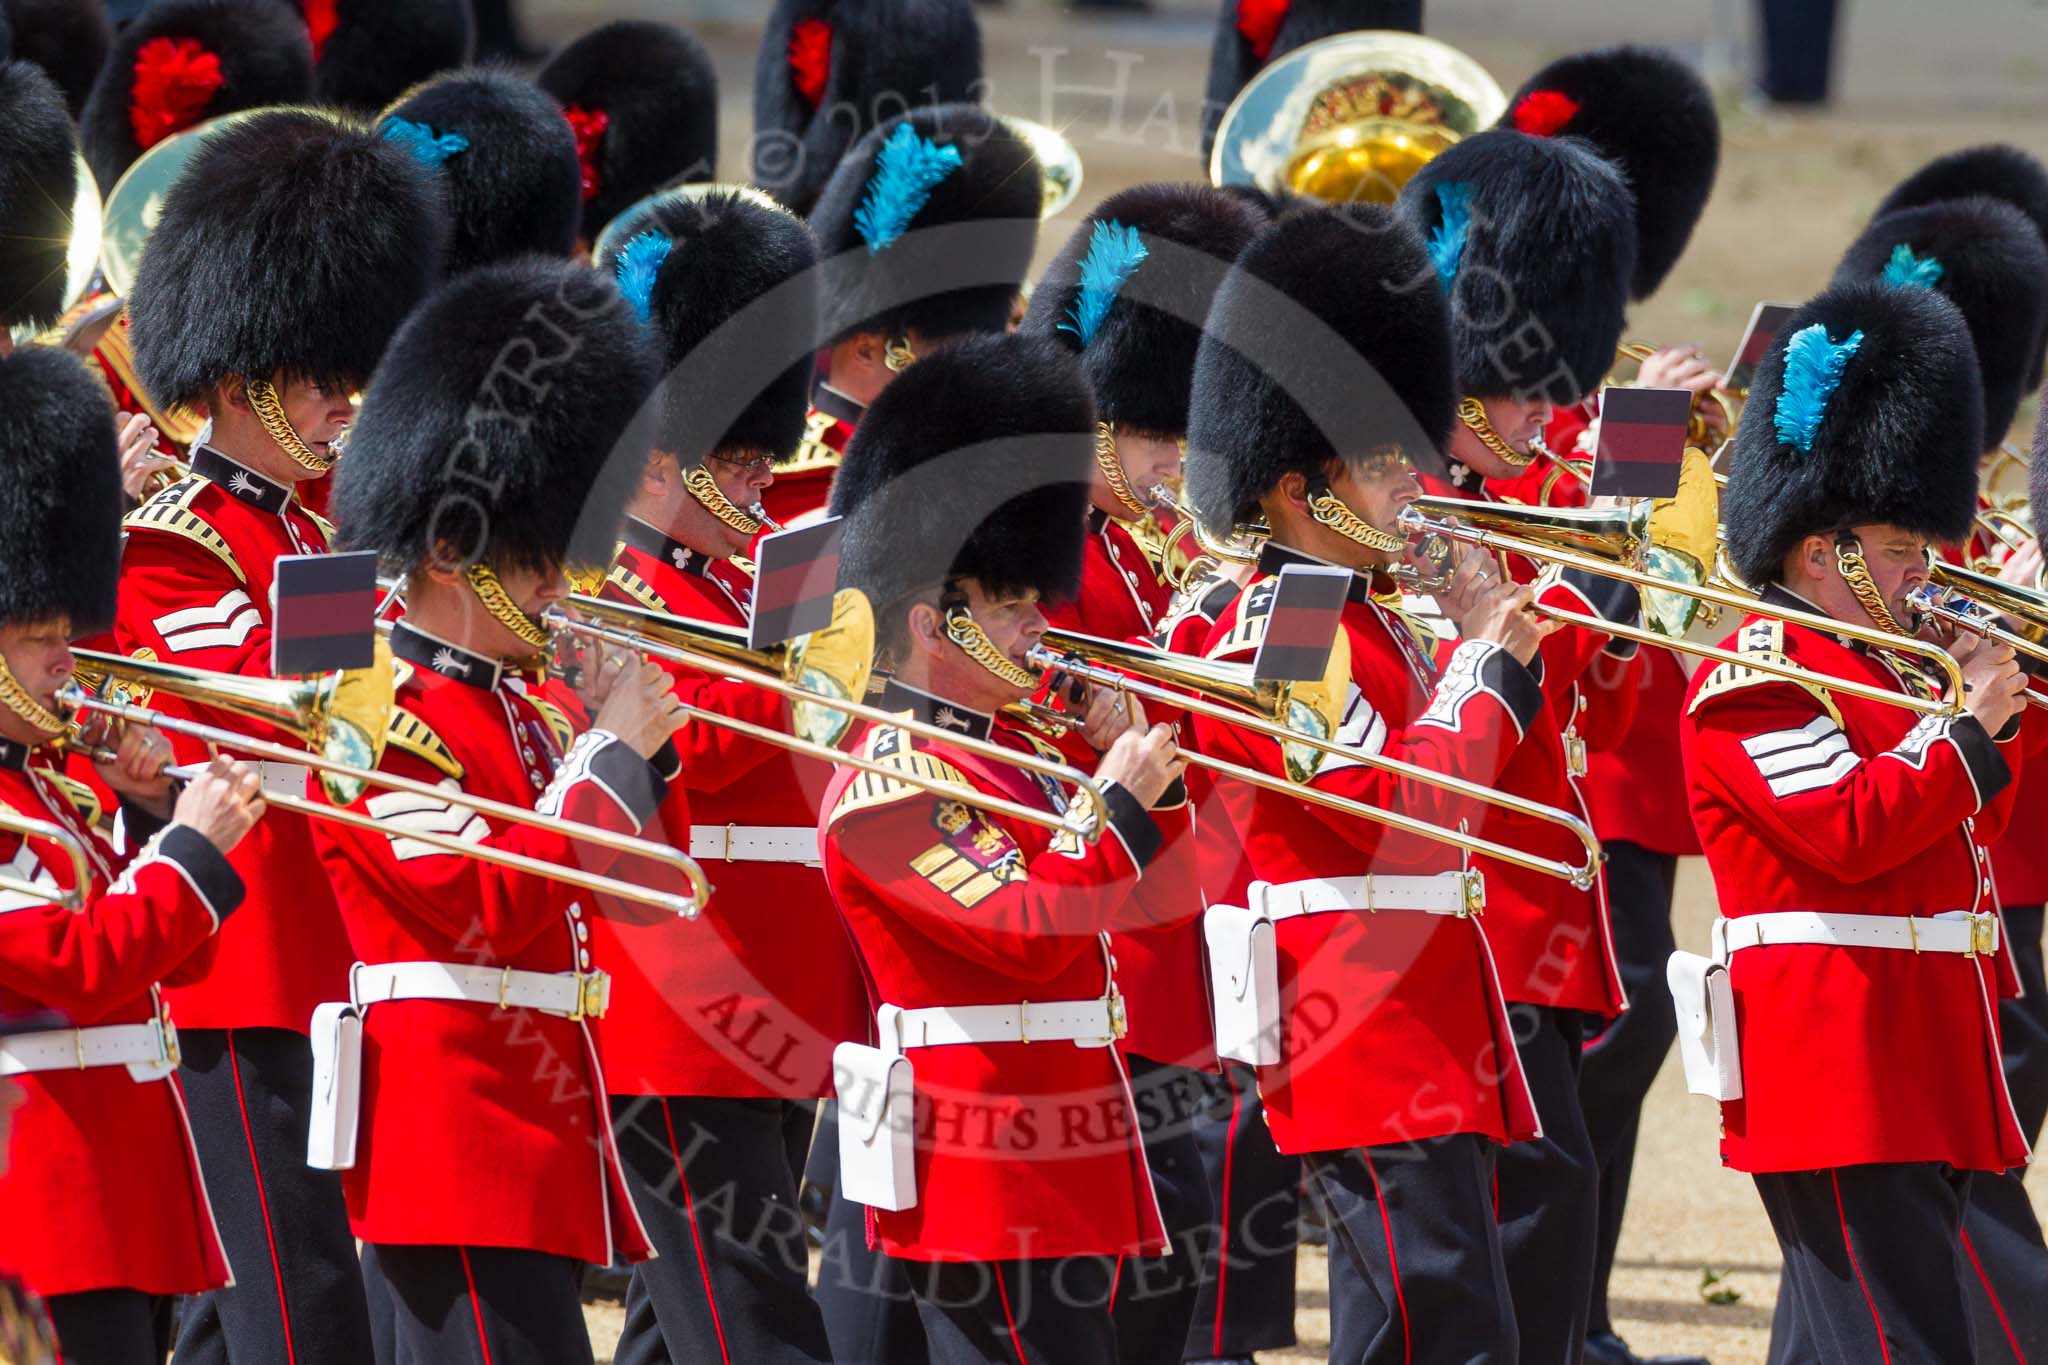 The Colonel's Review 2015.
Horse Guards Parade, Westminster,
London,

United Kingdom,
on 06 June 2015 at 11:07, image #243